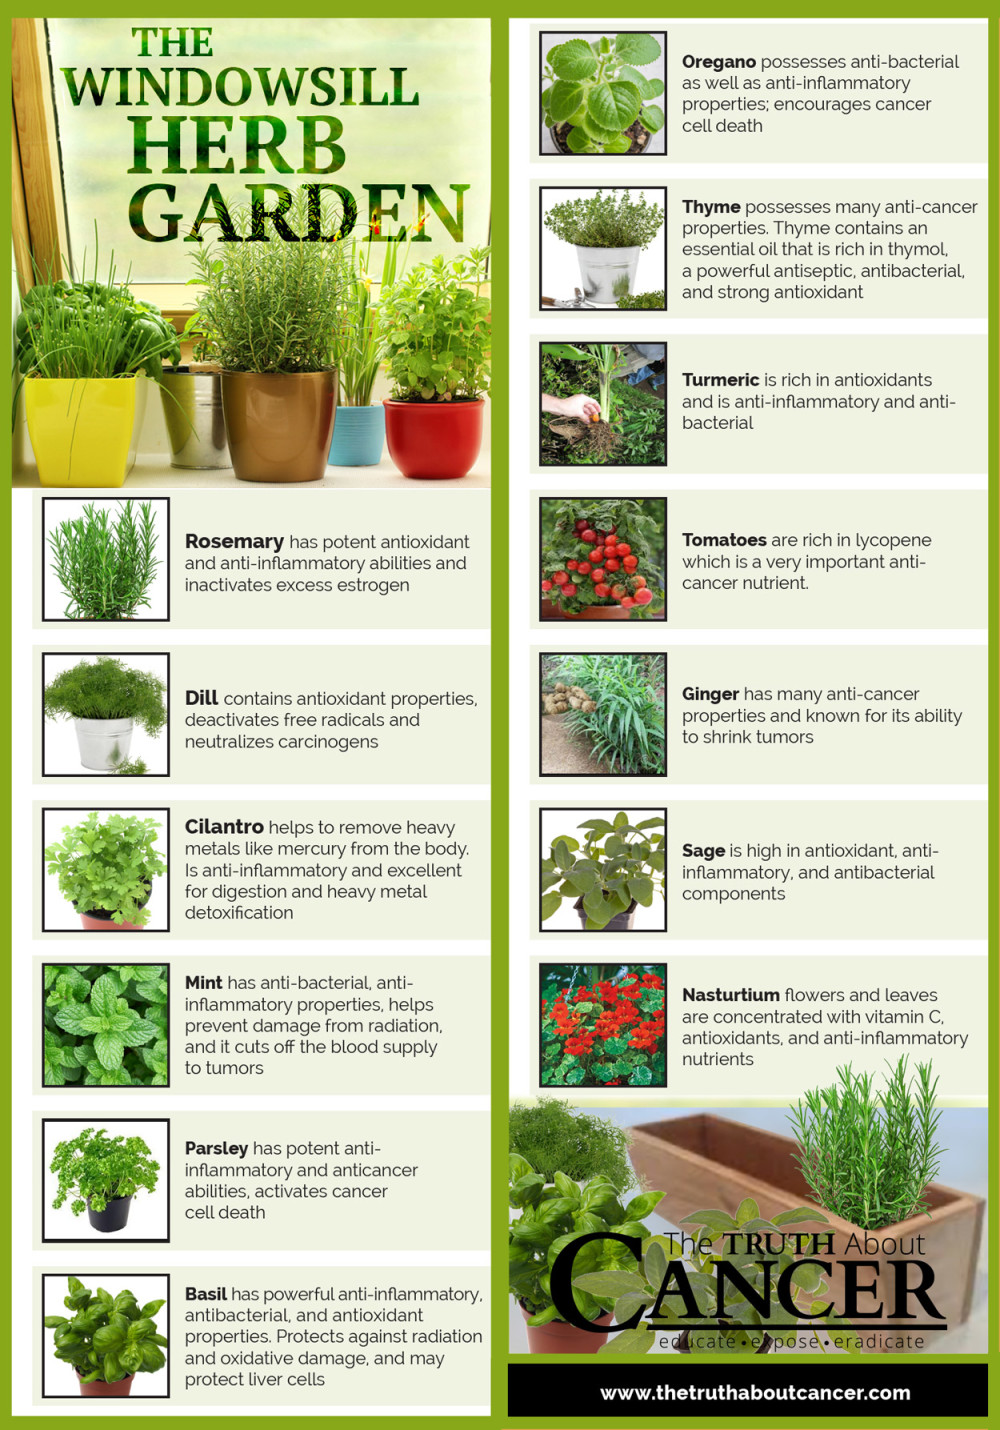 Anti-cancer herbs and plants